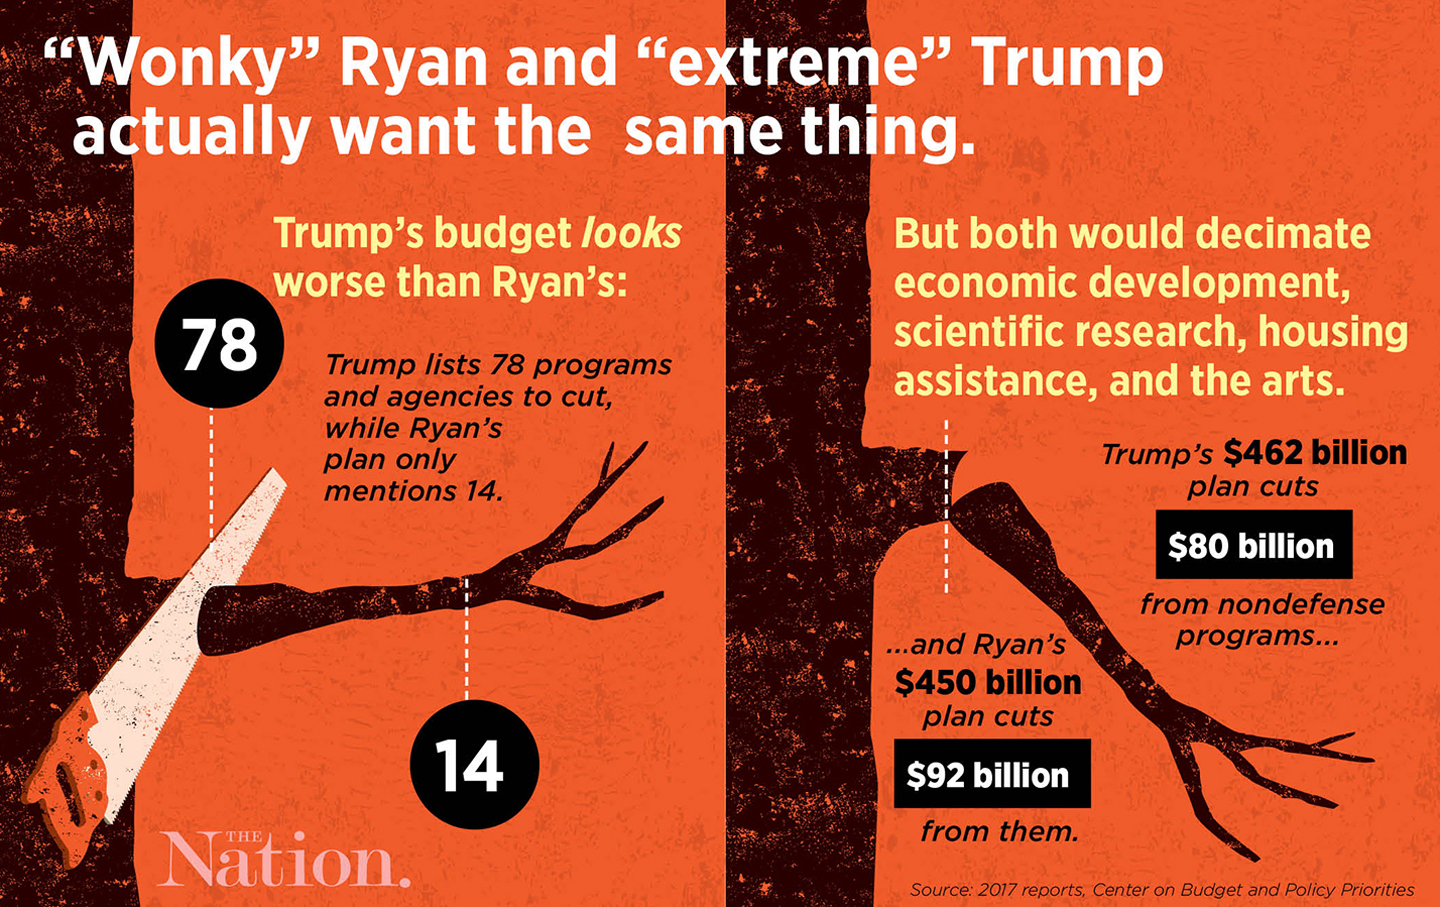 Trump’s ‘Extreme’ Budget Is Just Paul Ryan’s Old Bad Plan With a Comb-Over